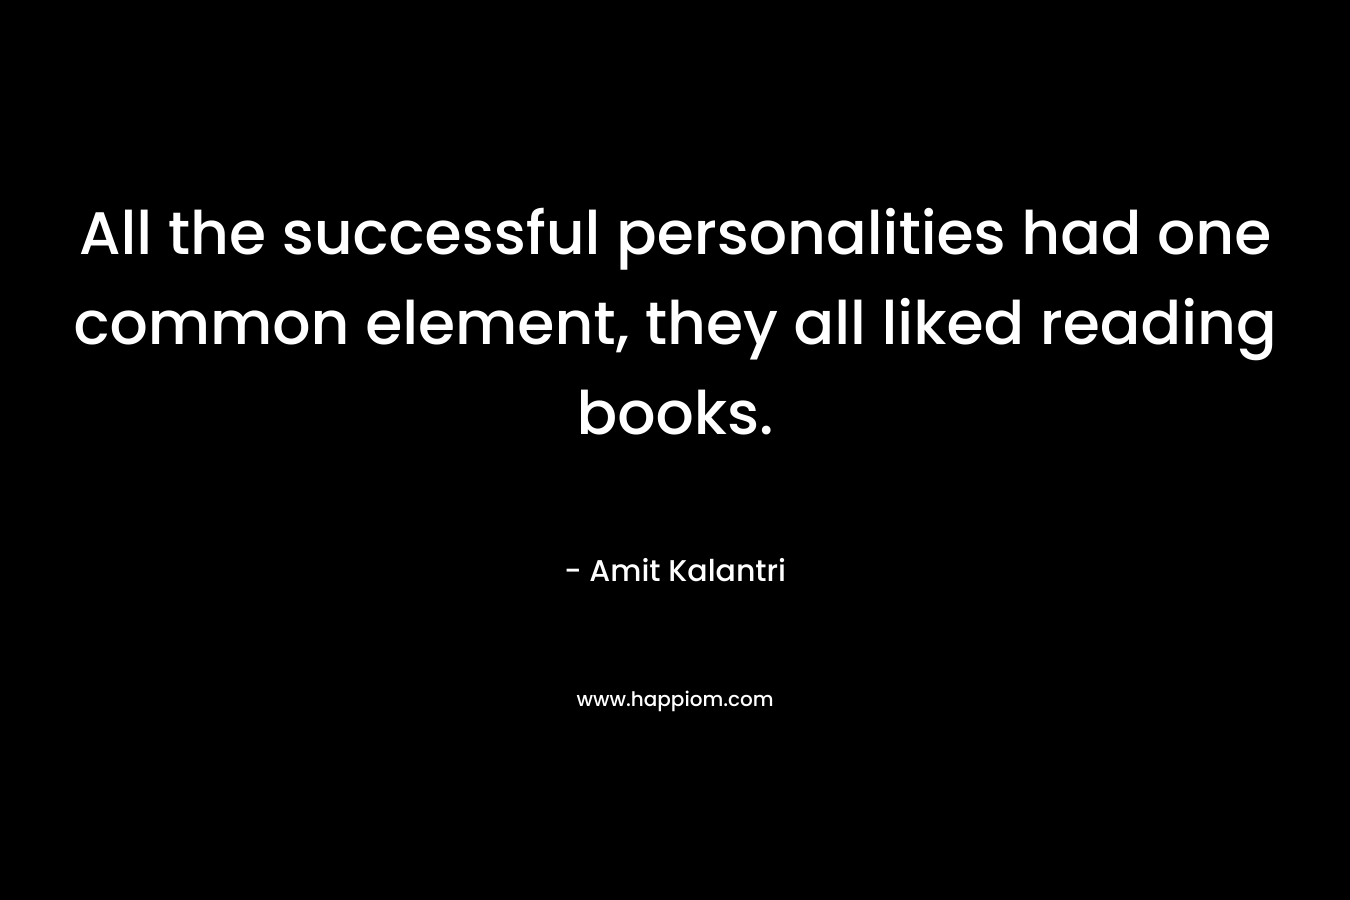 All the successful personalities had one common element, they all liked reading books.